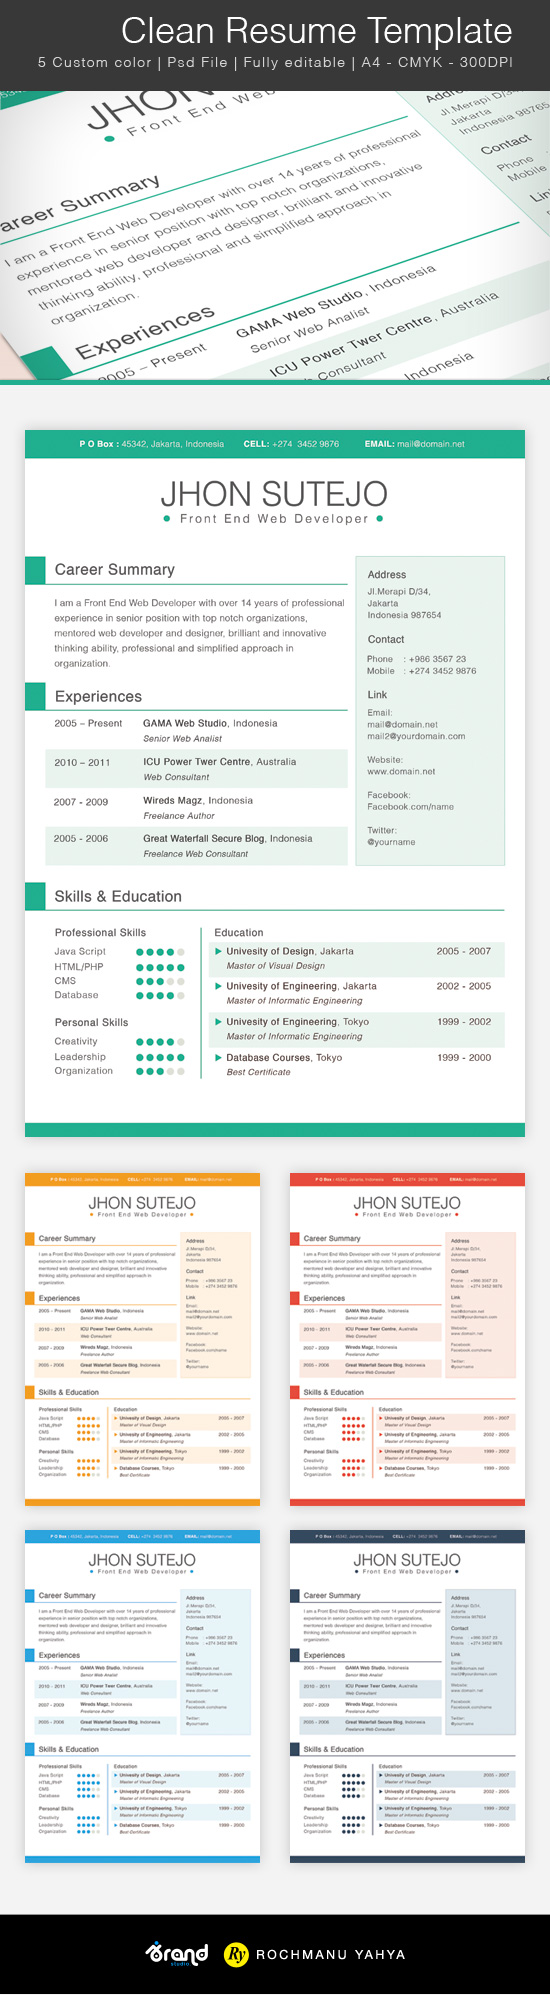 Free Clean Resume Template - 5 Colors